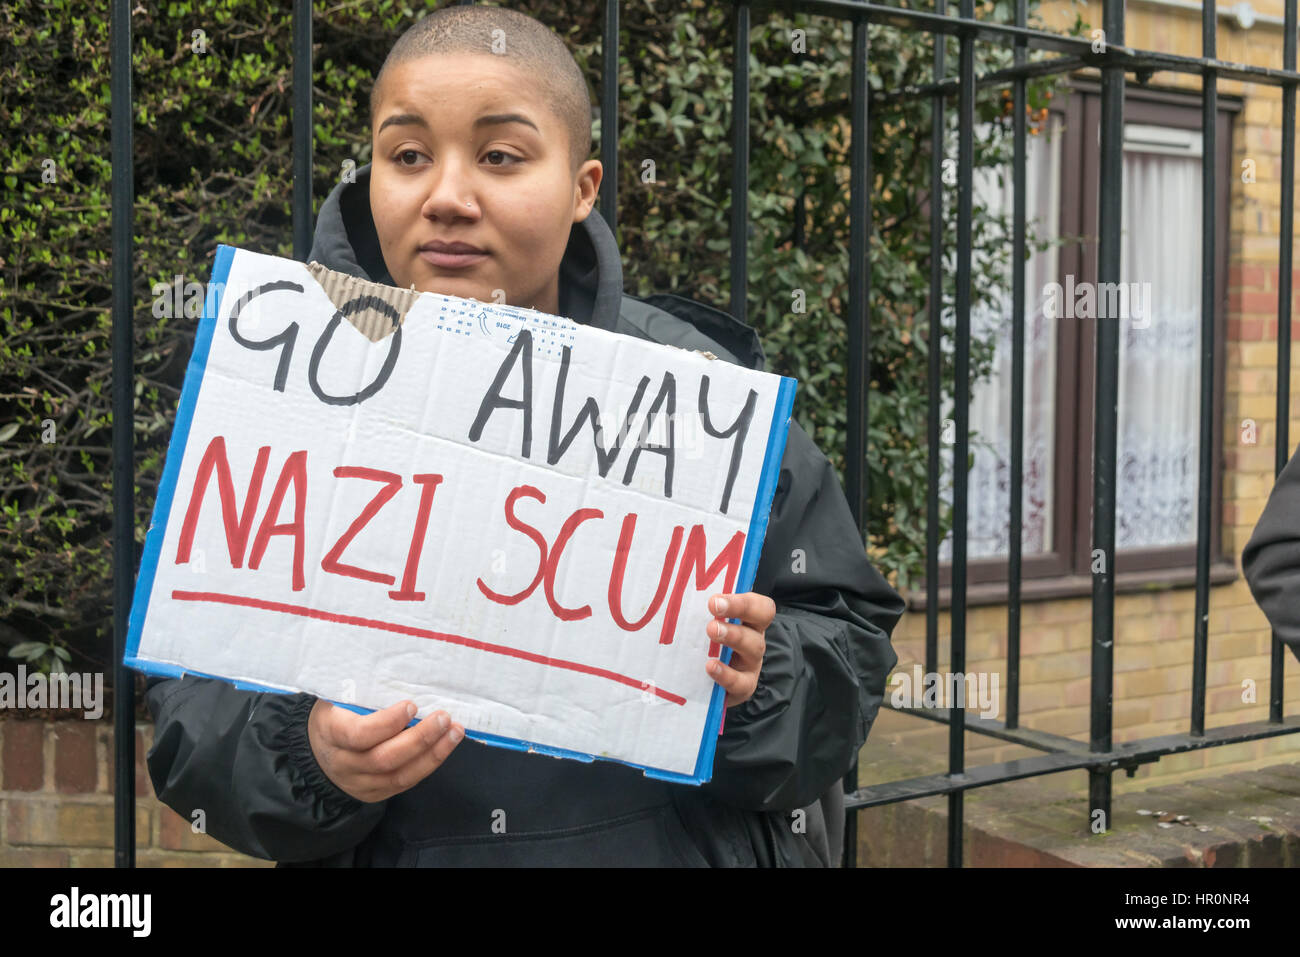 London, UK. 25th February 2017. One of several hundred people from East London outside the LD50 gallery in Dalston holds a poster 'Go Away Nazi Scum'. Protesters say the gallery in one of London's more diverse areas has promoted fascists, neo-Nazis, misogynists, racists and Islamophobes and 'has been responsible for one of the most extensive neo-Nazi cultural programmes to appear in London in the last decade.' The protesters want the gallery to be closed. Credit: Peter Marshall/Alamy Live News Stock Photo